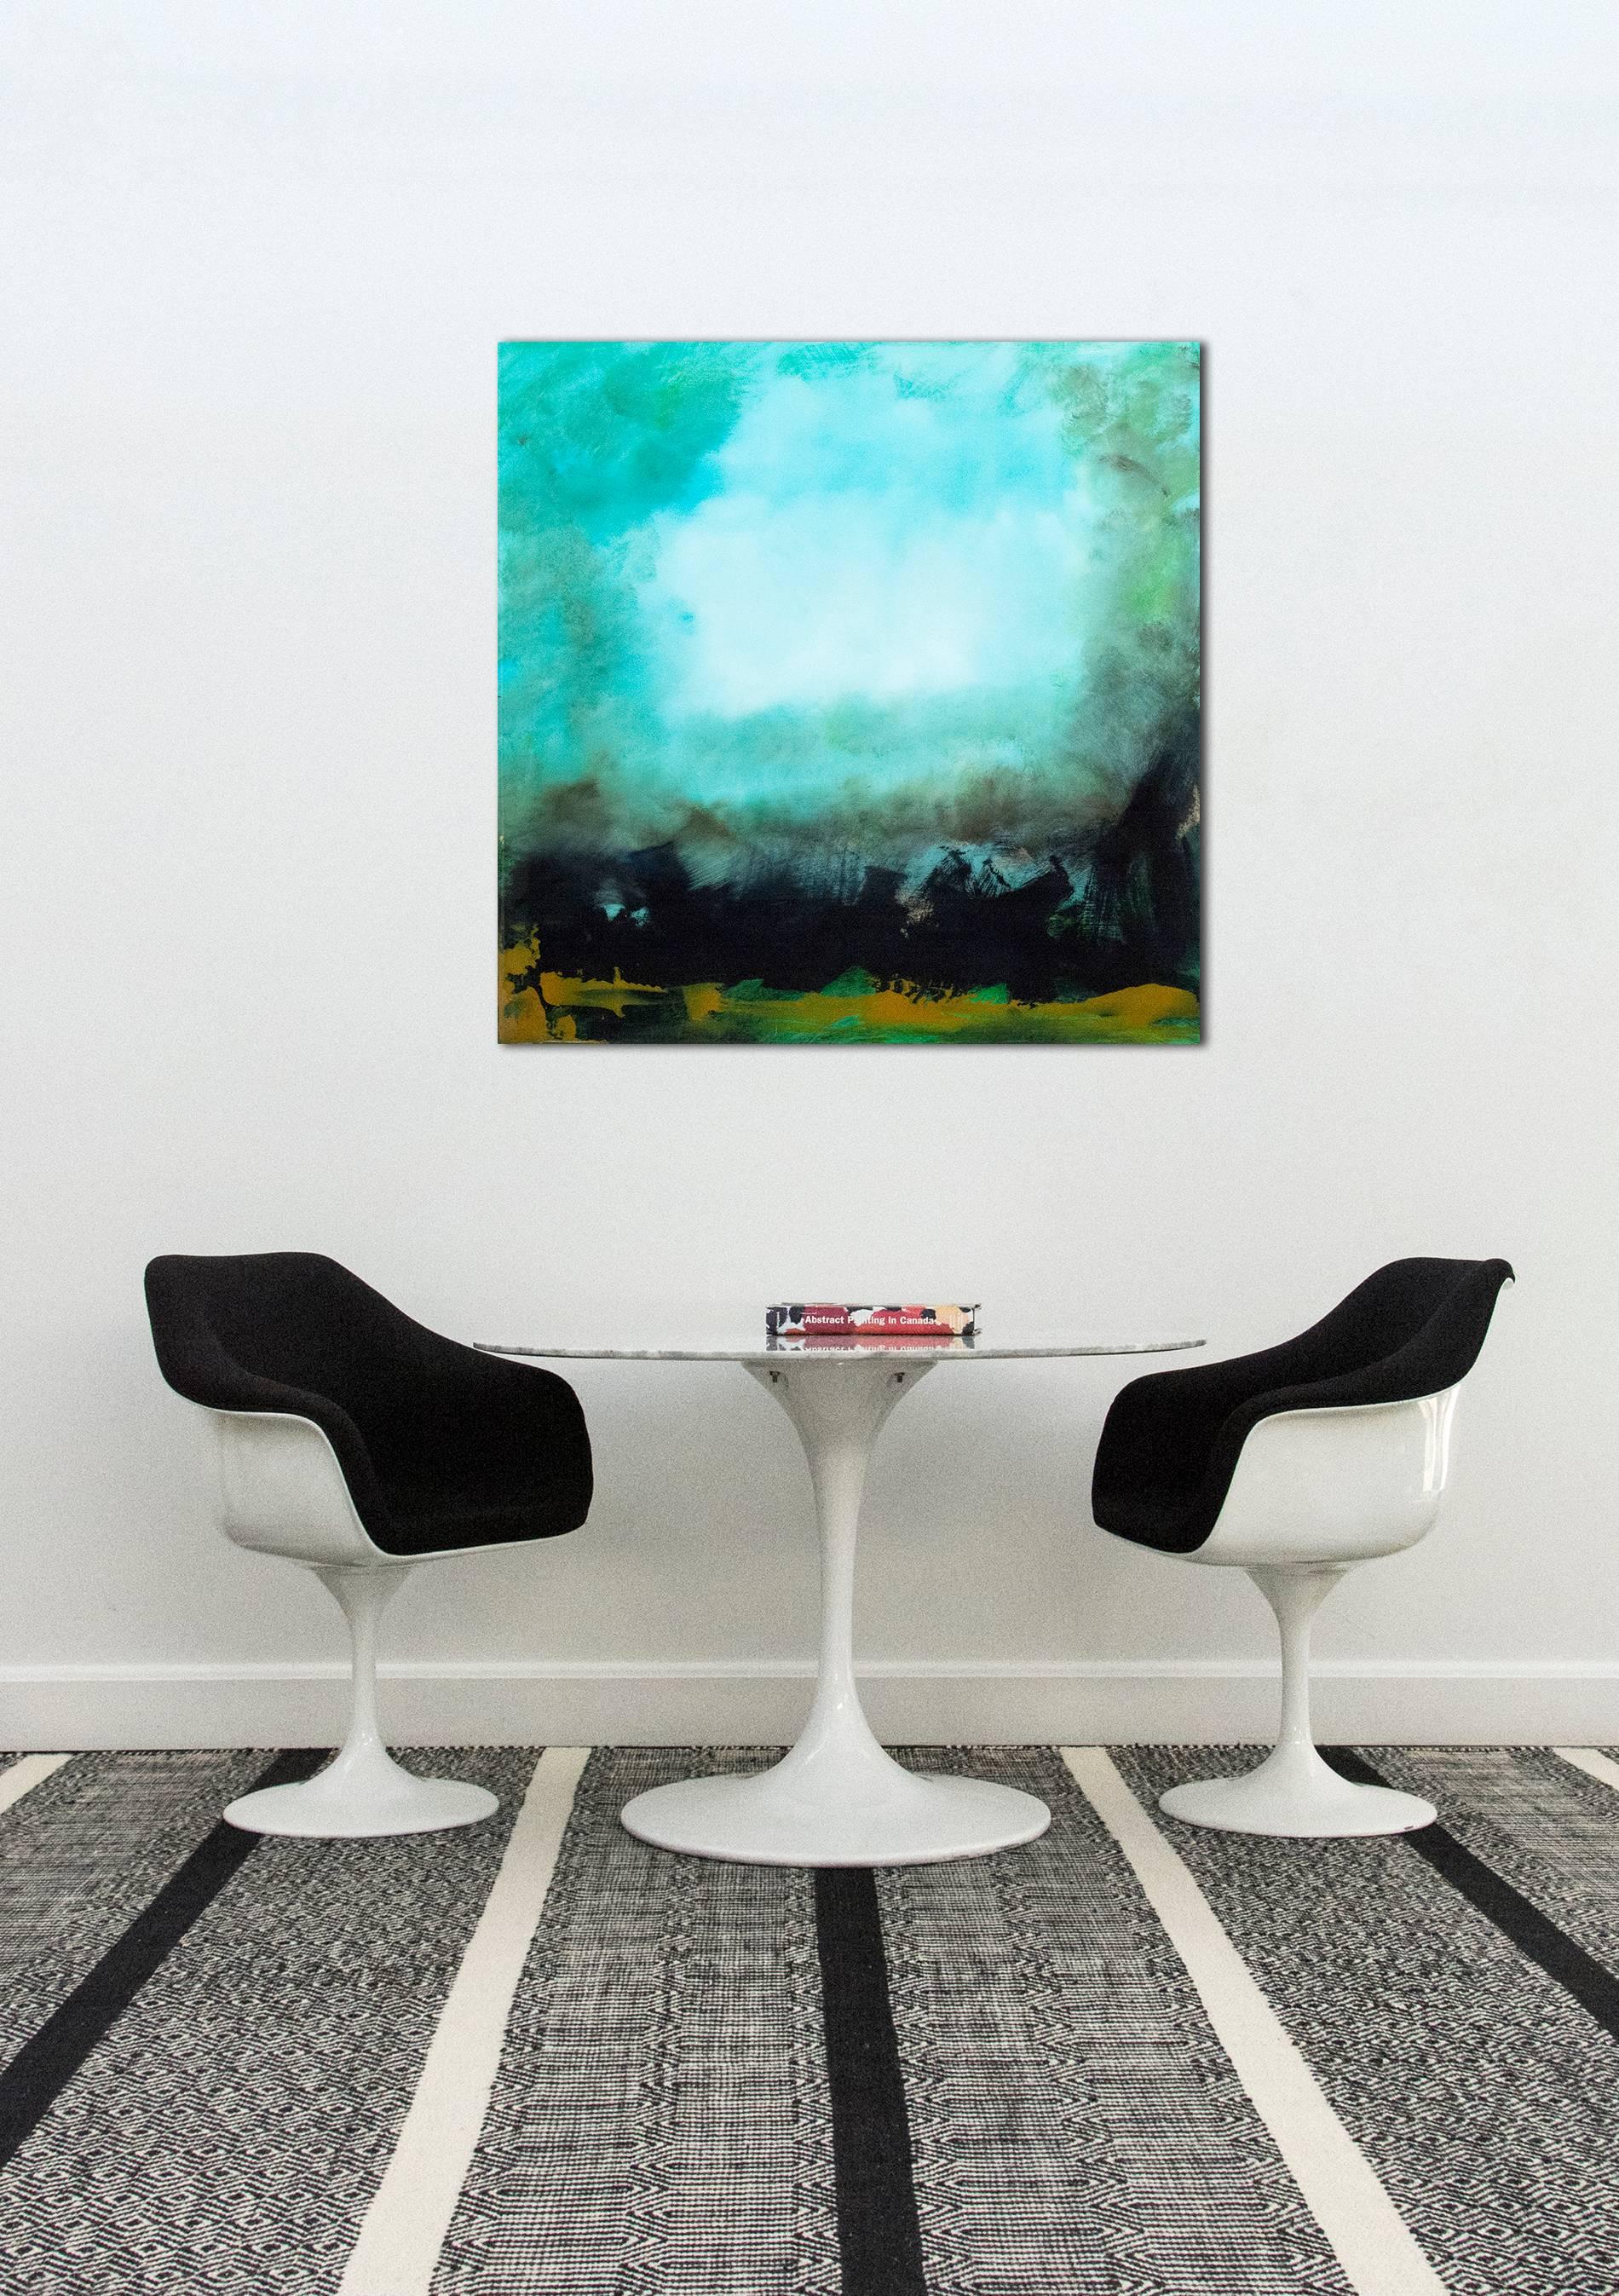 A brilliant opening framed in green-blue reflected in the water below burns through an azure sky in this luminous and moody painting by Jay Hodgins. The artist applies layers of acrylic that are coated in a glossy resin to create depth and light. 